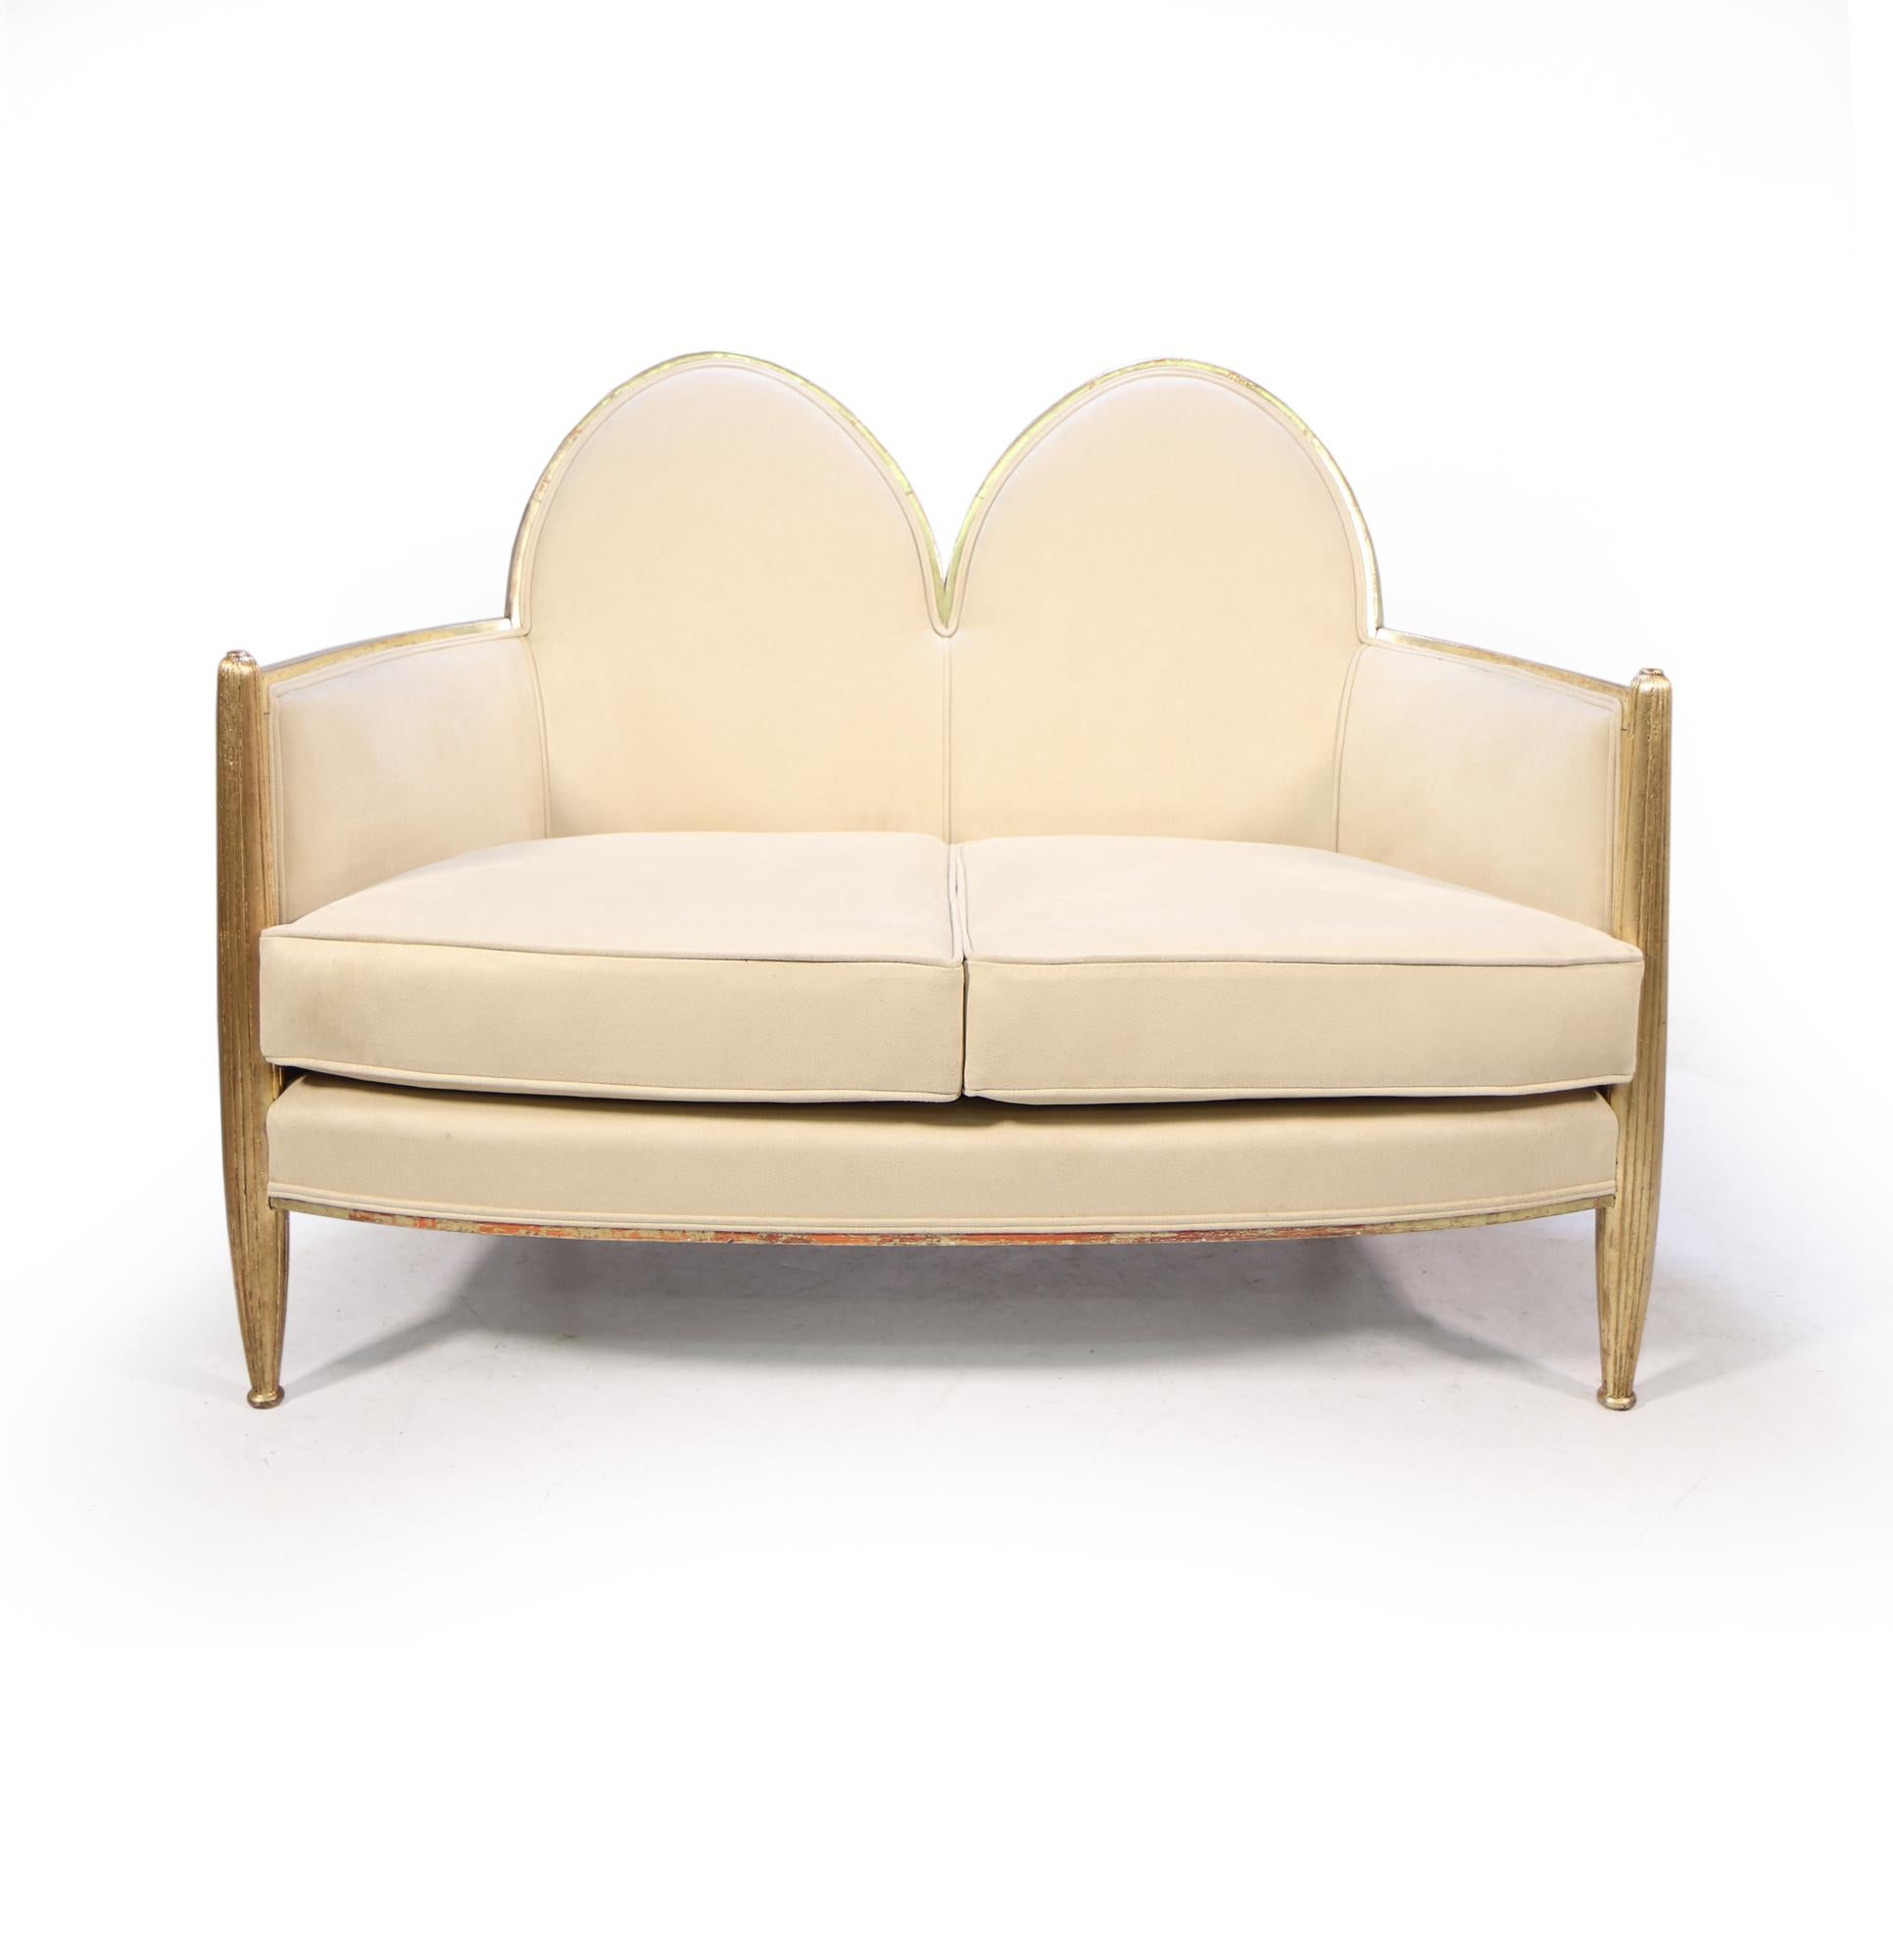 A fine quality parcel gilt double shield back sofa, with two toned gilding the turned and fluted legs are gold leaf and the frame is white gold, this has 70% of original gilding and we have had it carefully matched in keeping the patina to the gold.